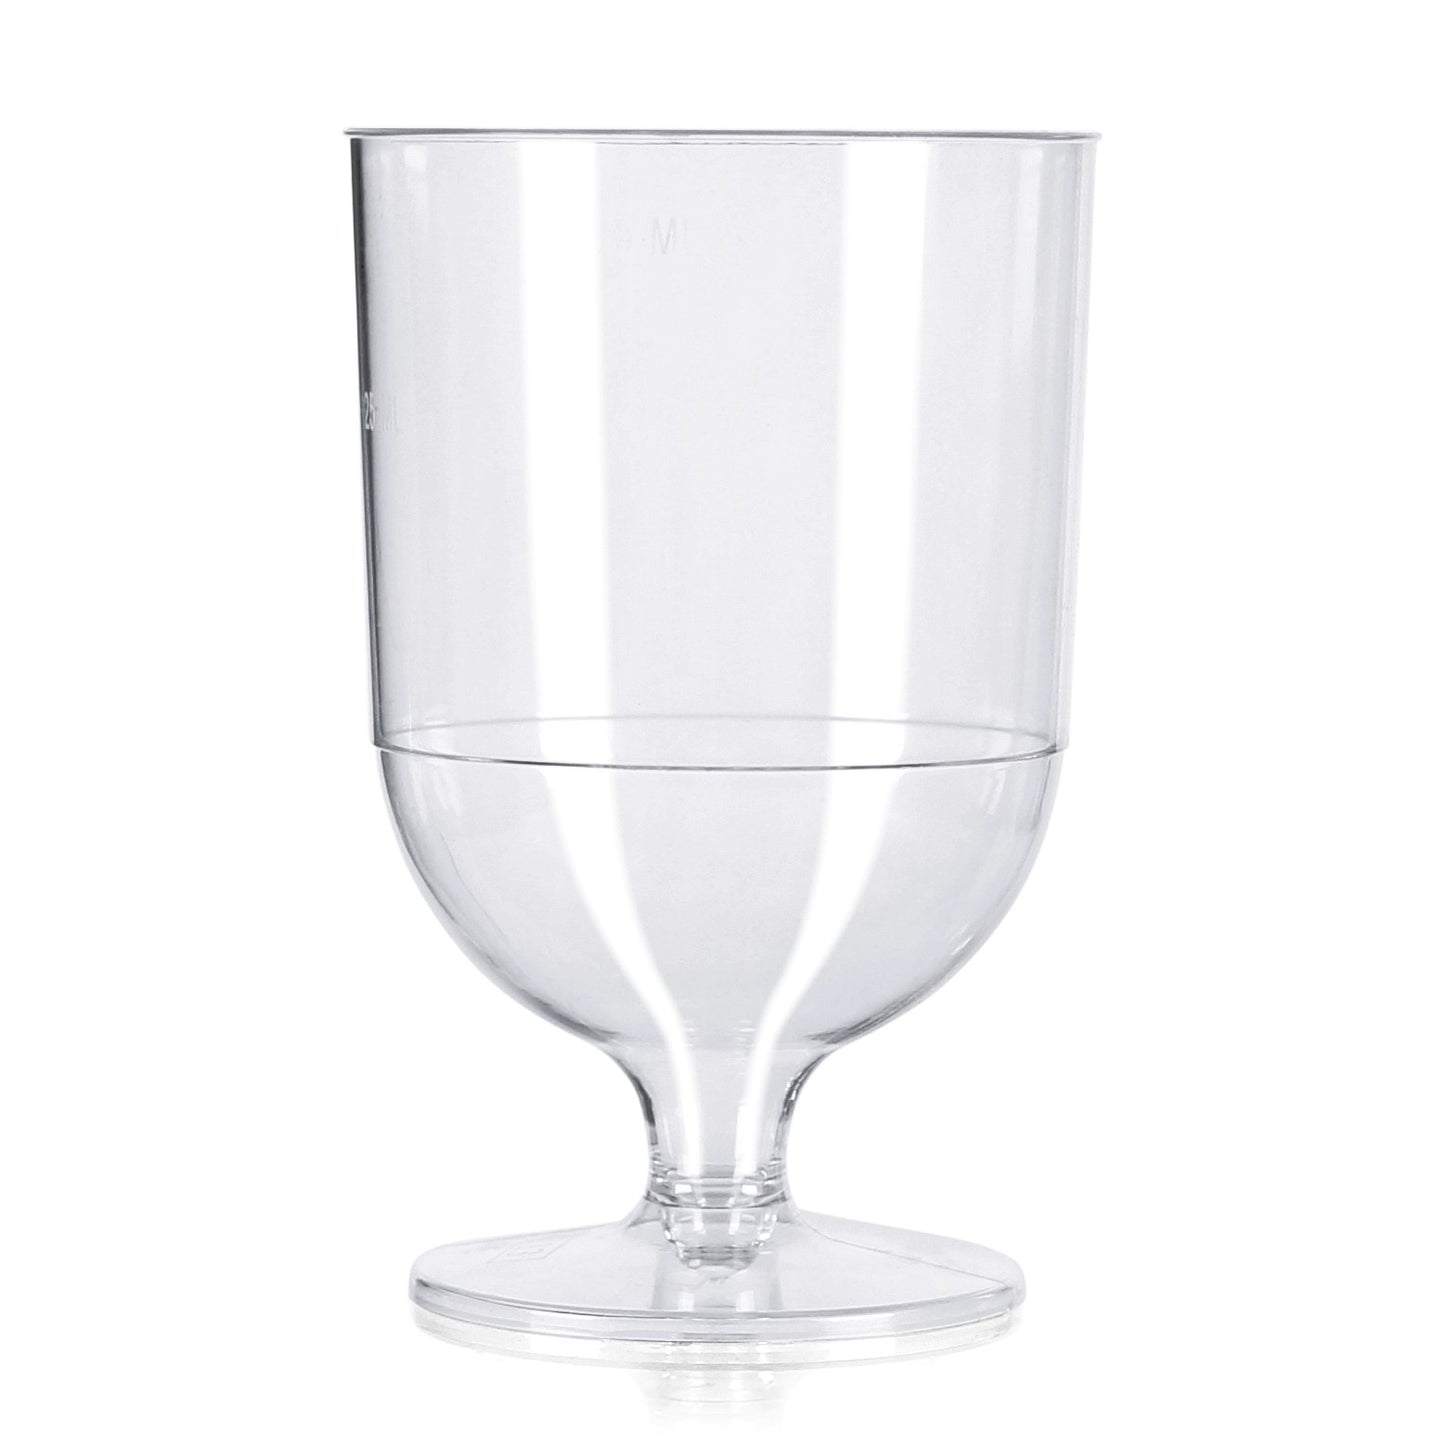 Plastic Wine Glass - One piece - Disposable - Box of 150 glasses - Party, BBQ-PCUP-WINE-15-Product Pro-Wine Glasses